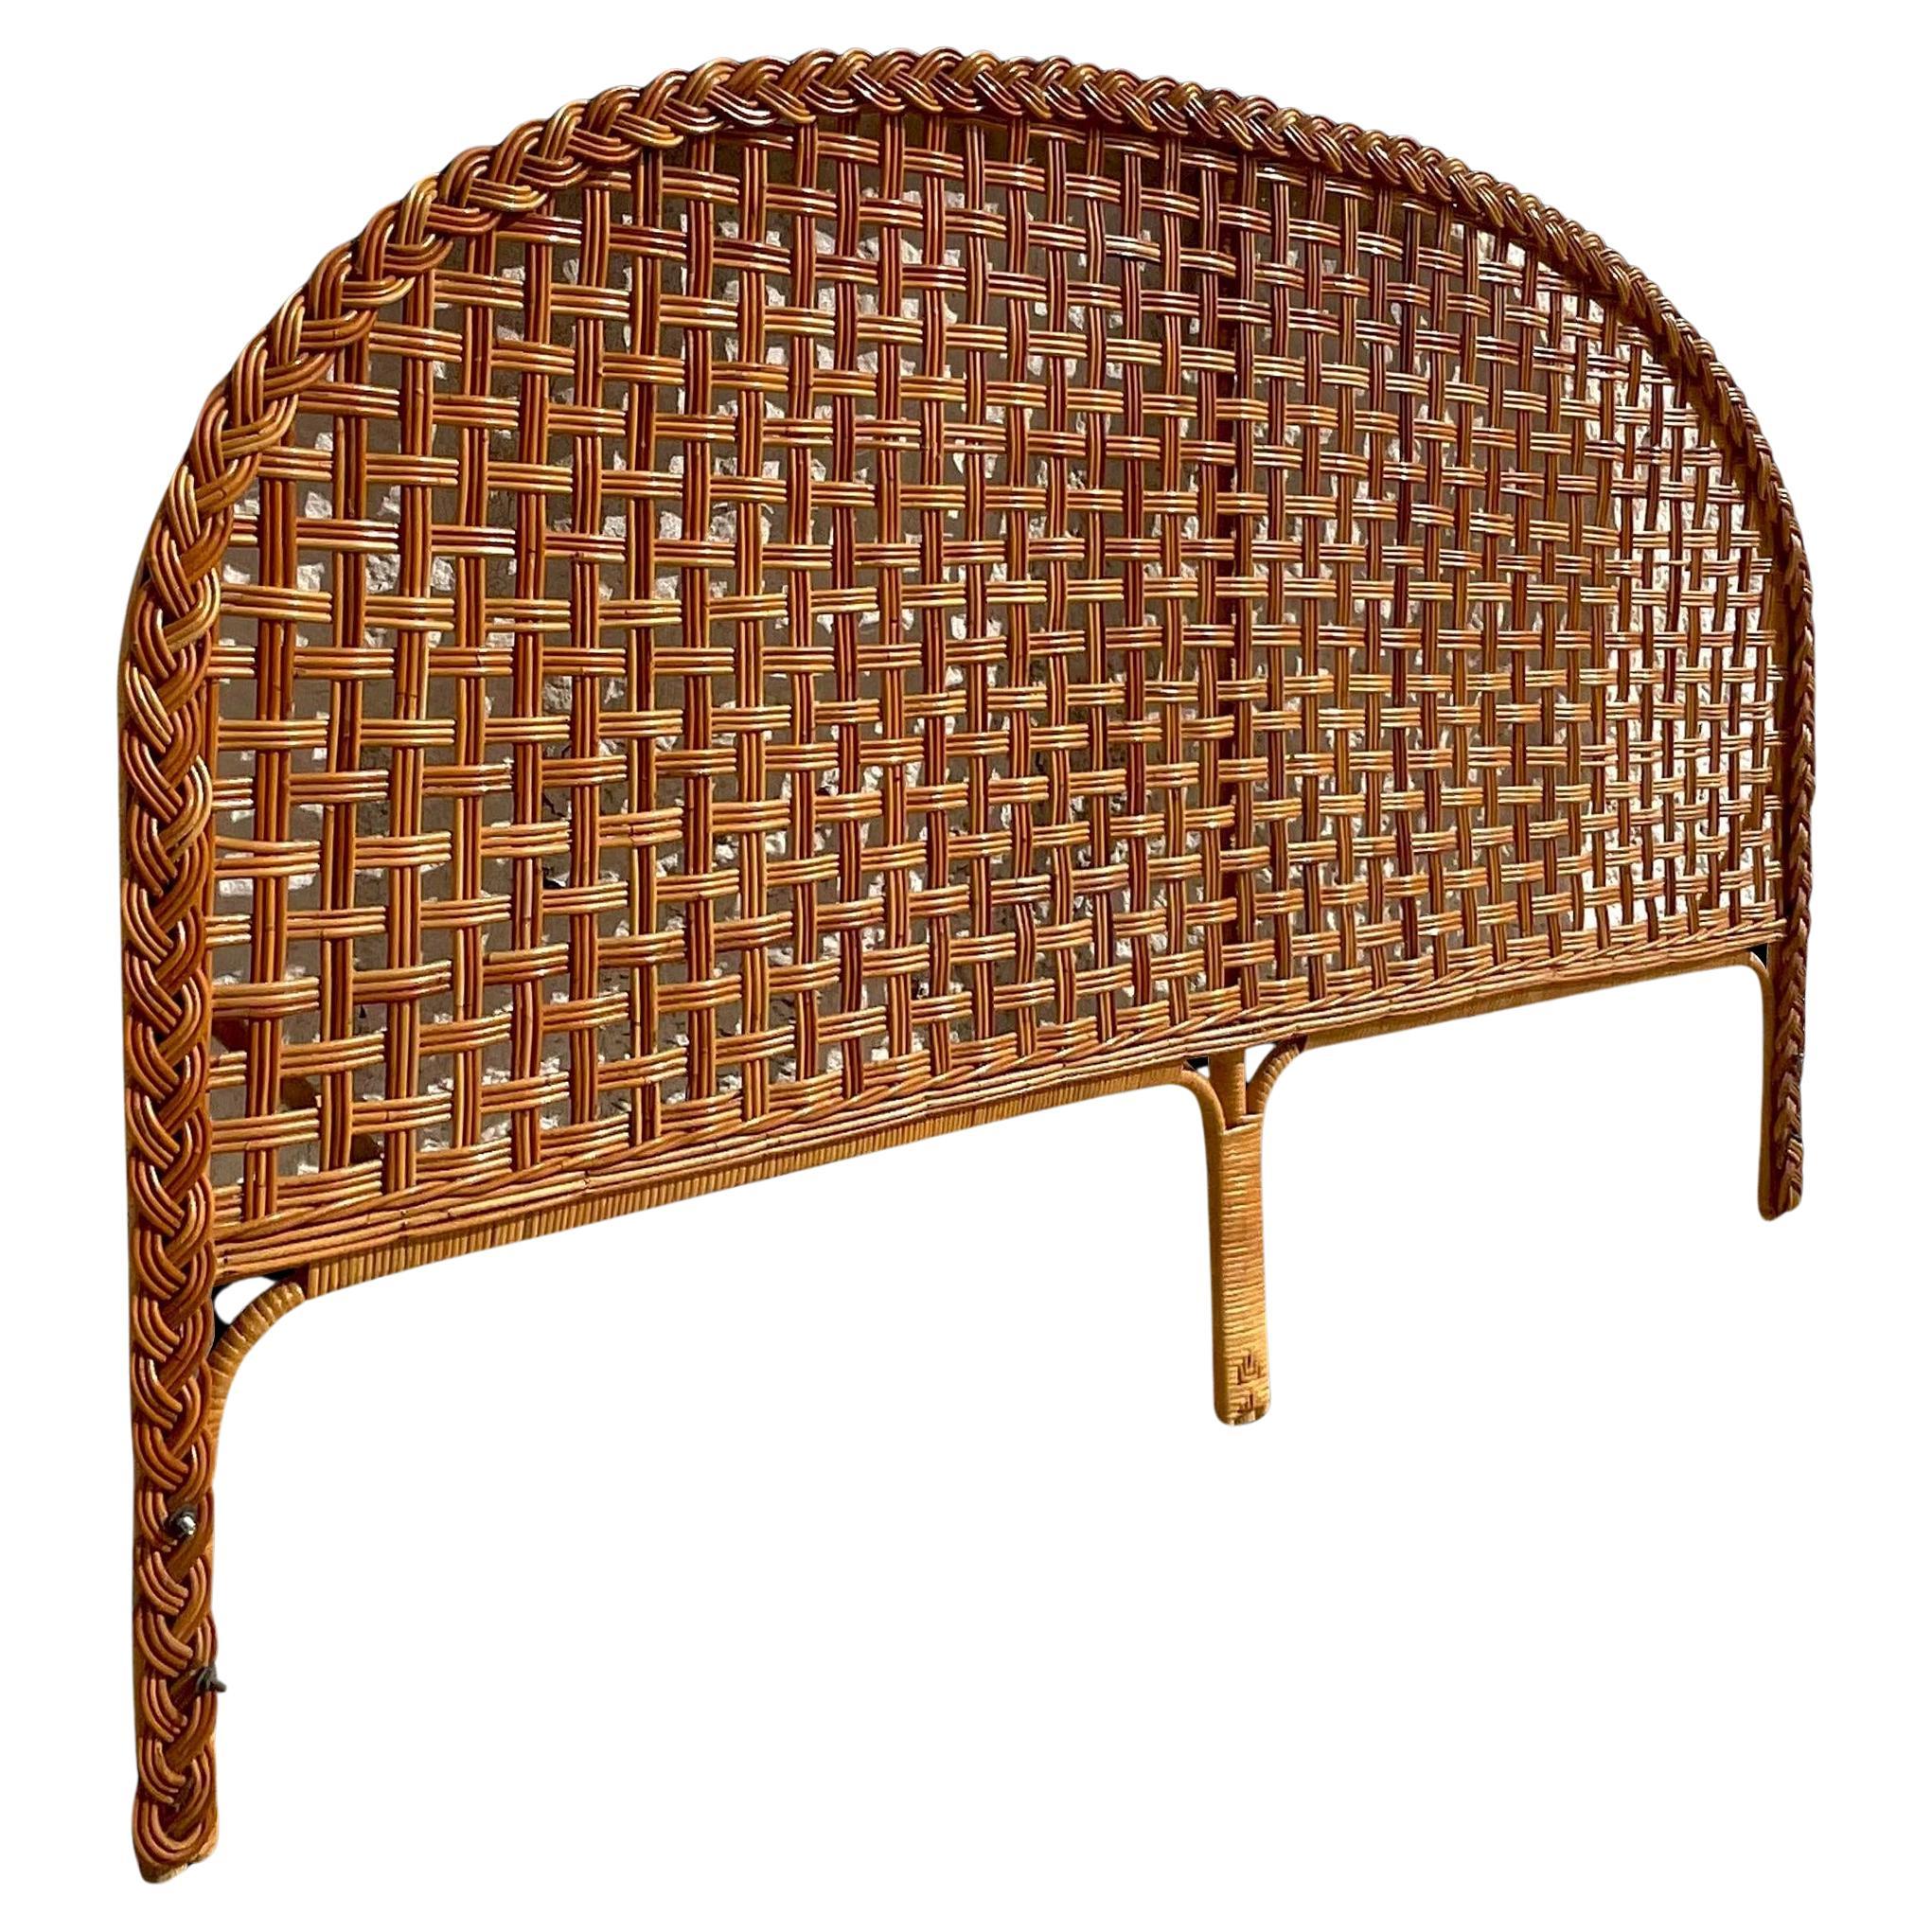 Late 20th Century Vintage Coastal Woven Rattan Arched King Headboard For Sale